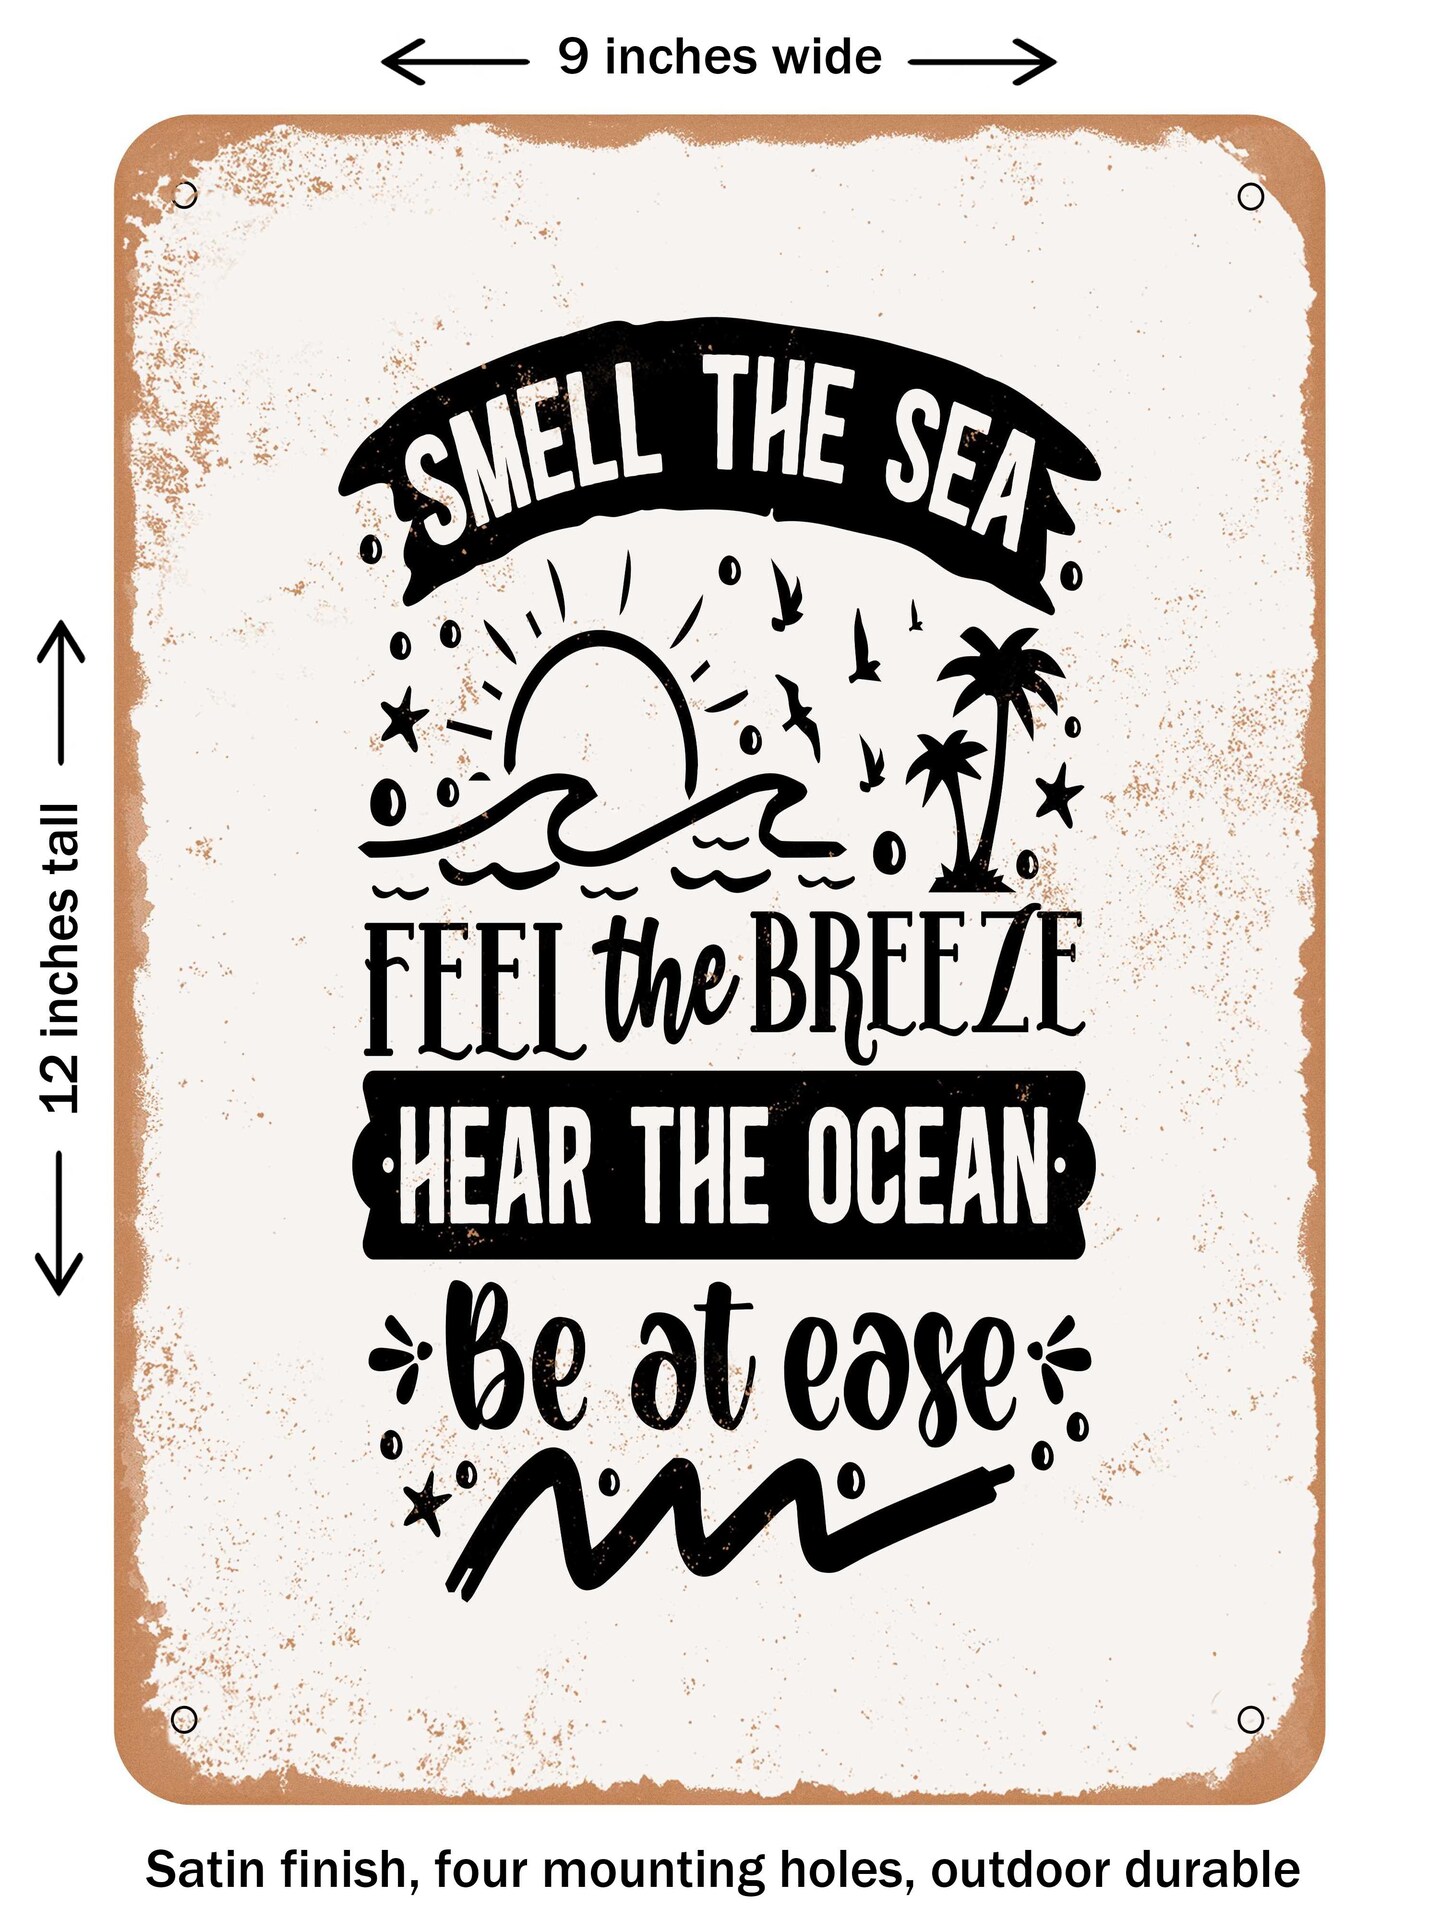 Decorative Metal Sign Smell The Sea Feel The Breeze Hear The Ocean Be At Ease Vintage Rusty